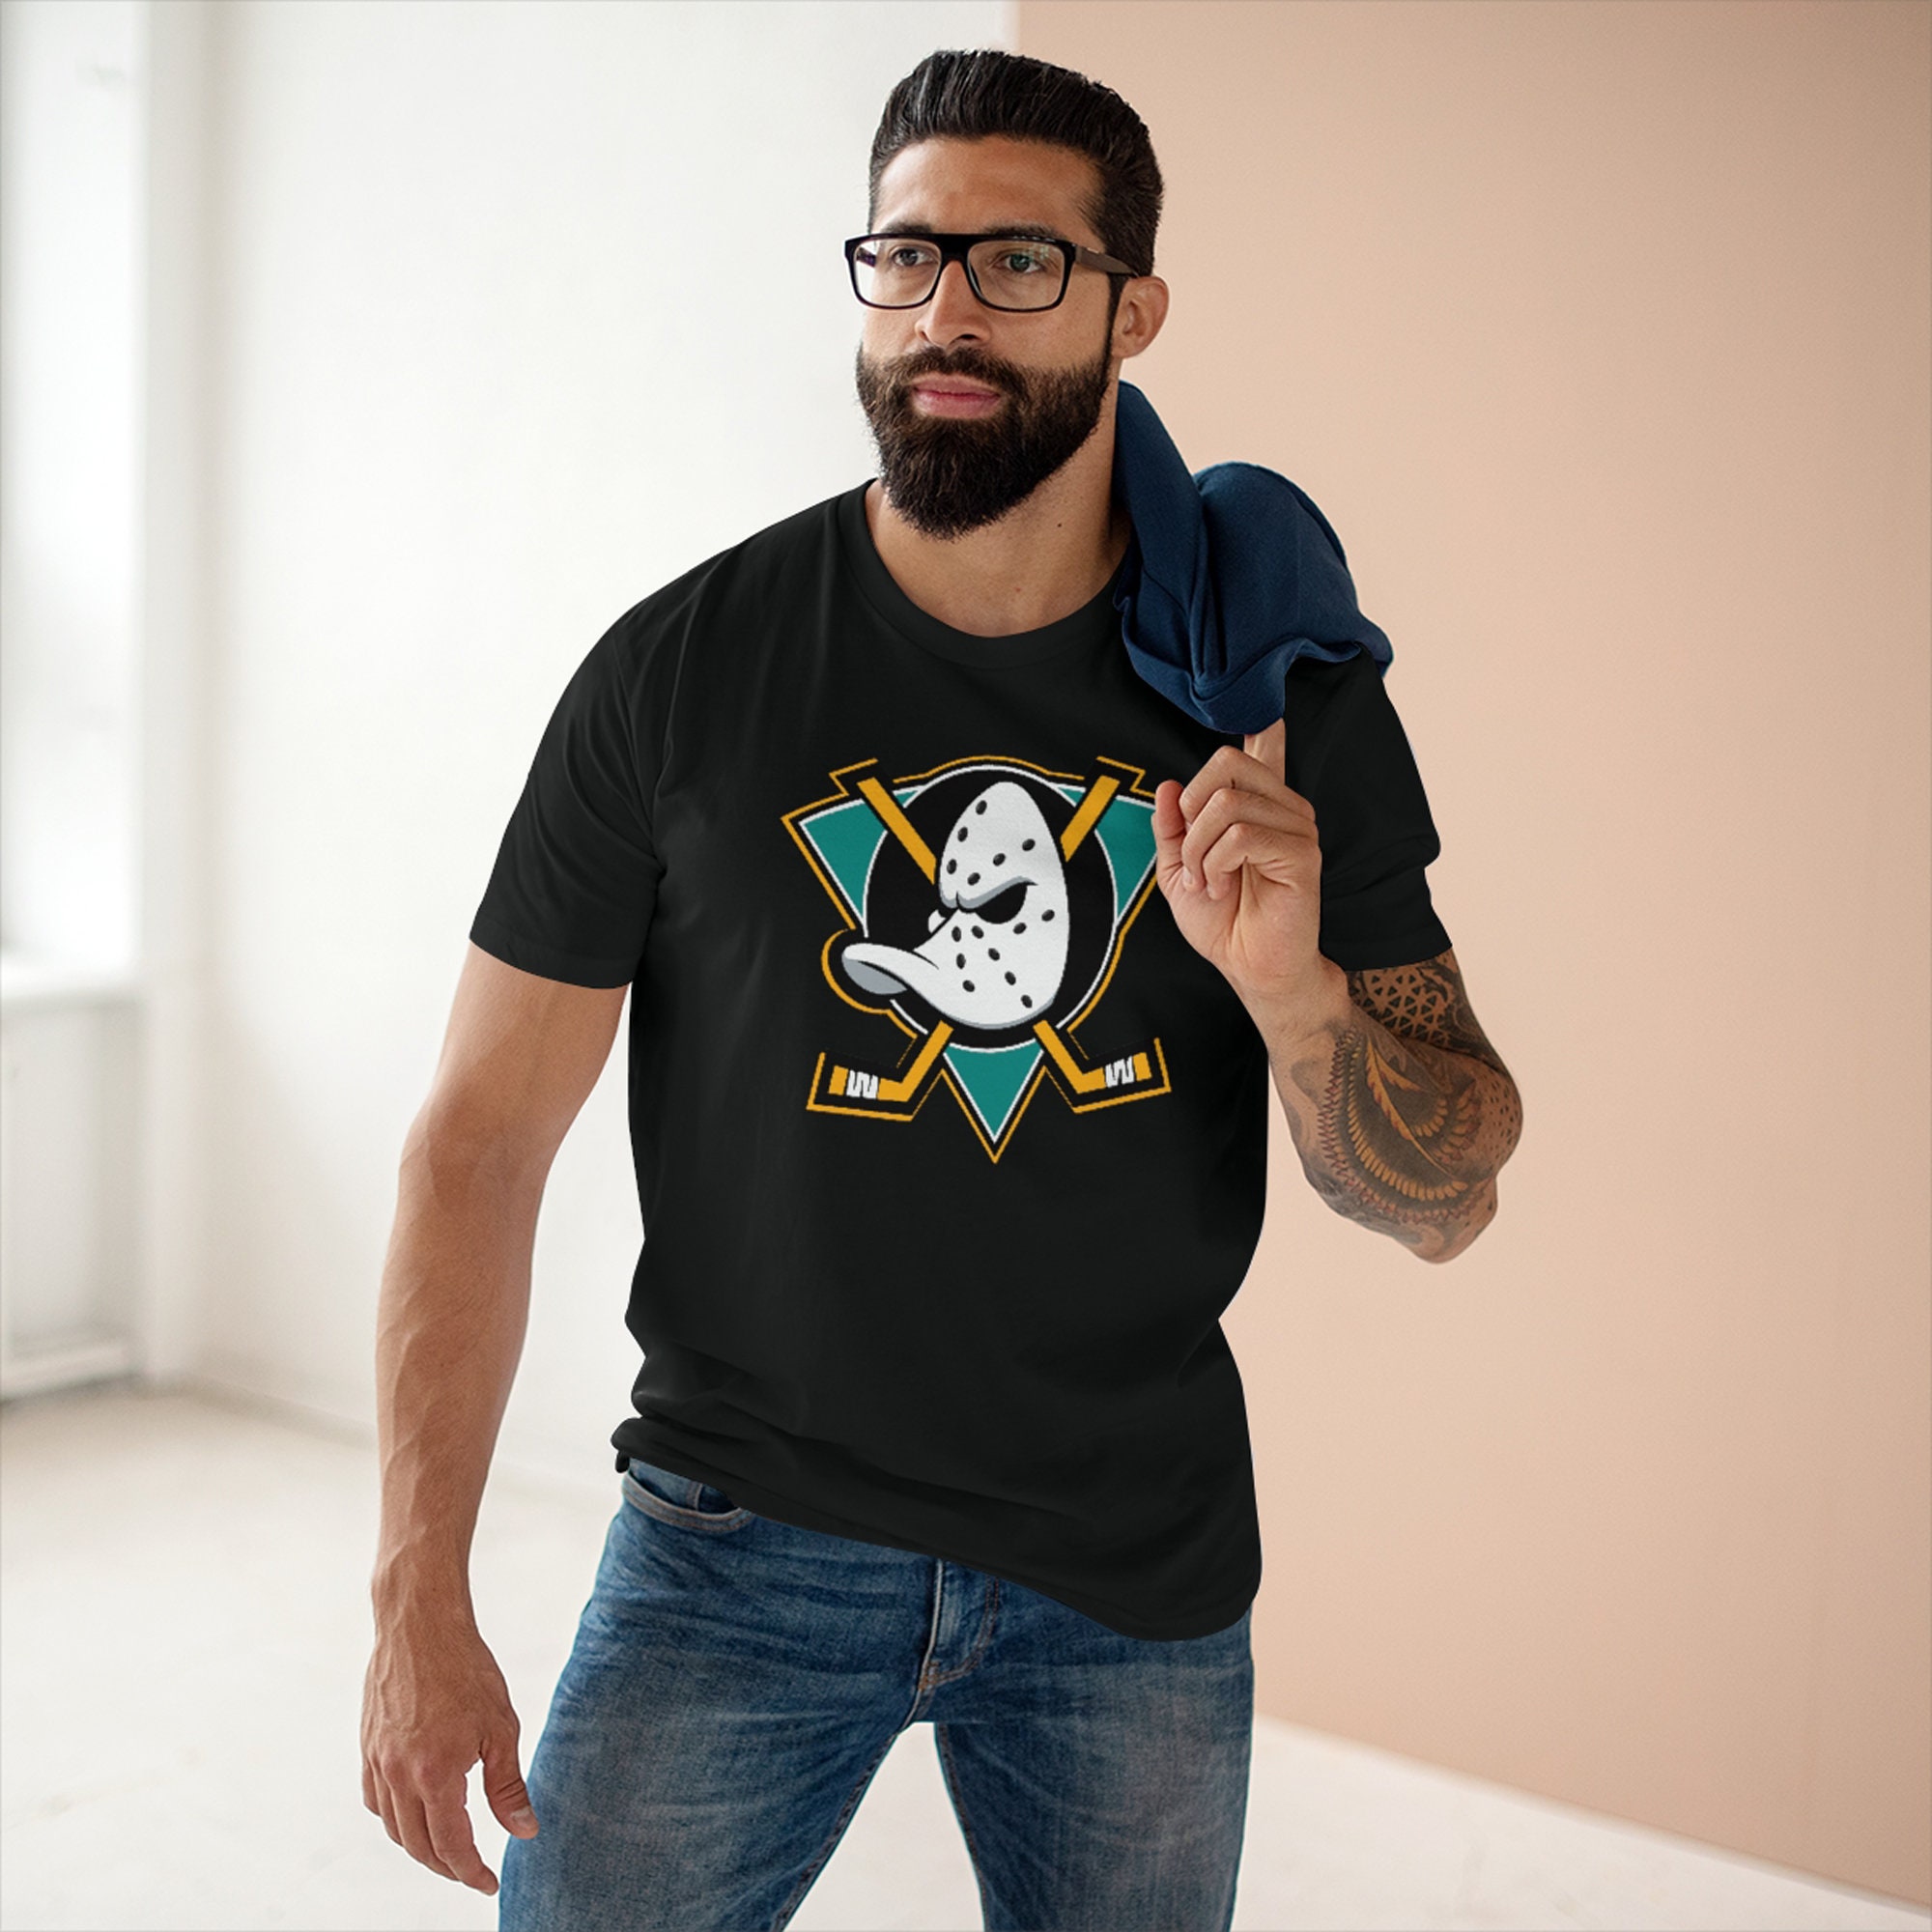 Bombay was a Hawk Kids T-Shirt for Sale by MightyDucksD123